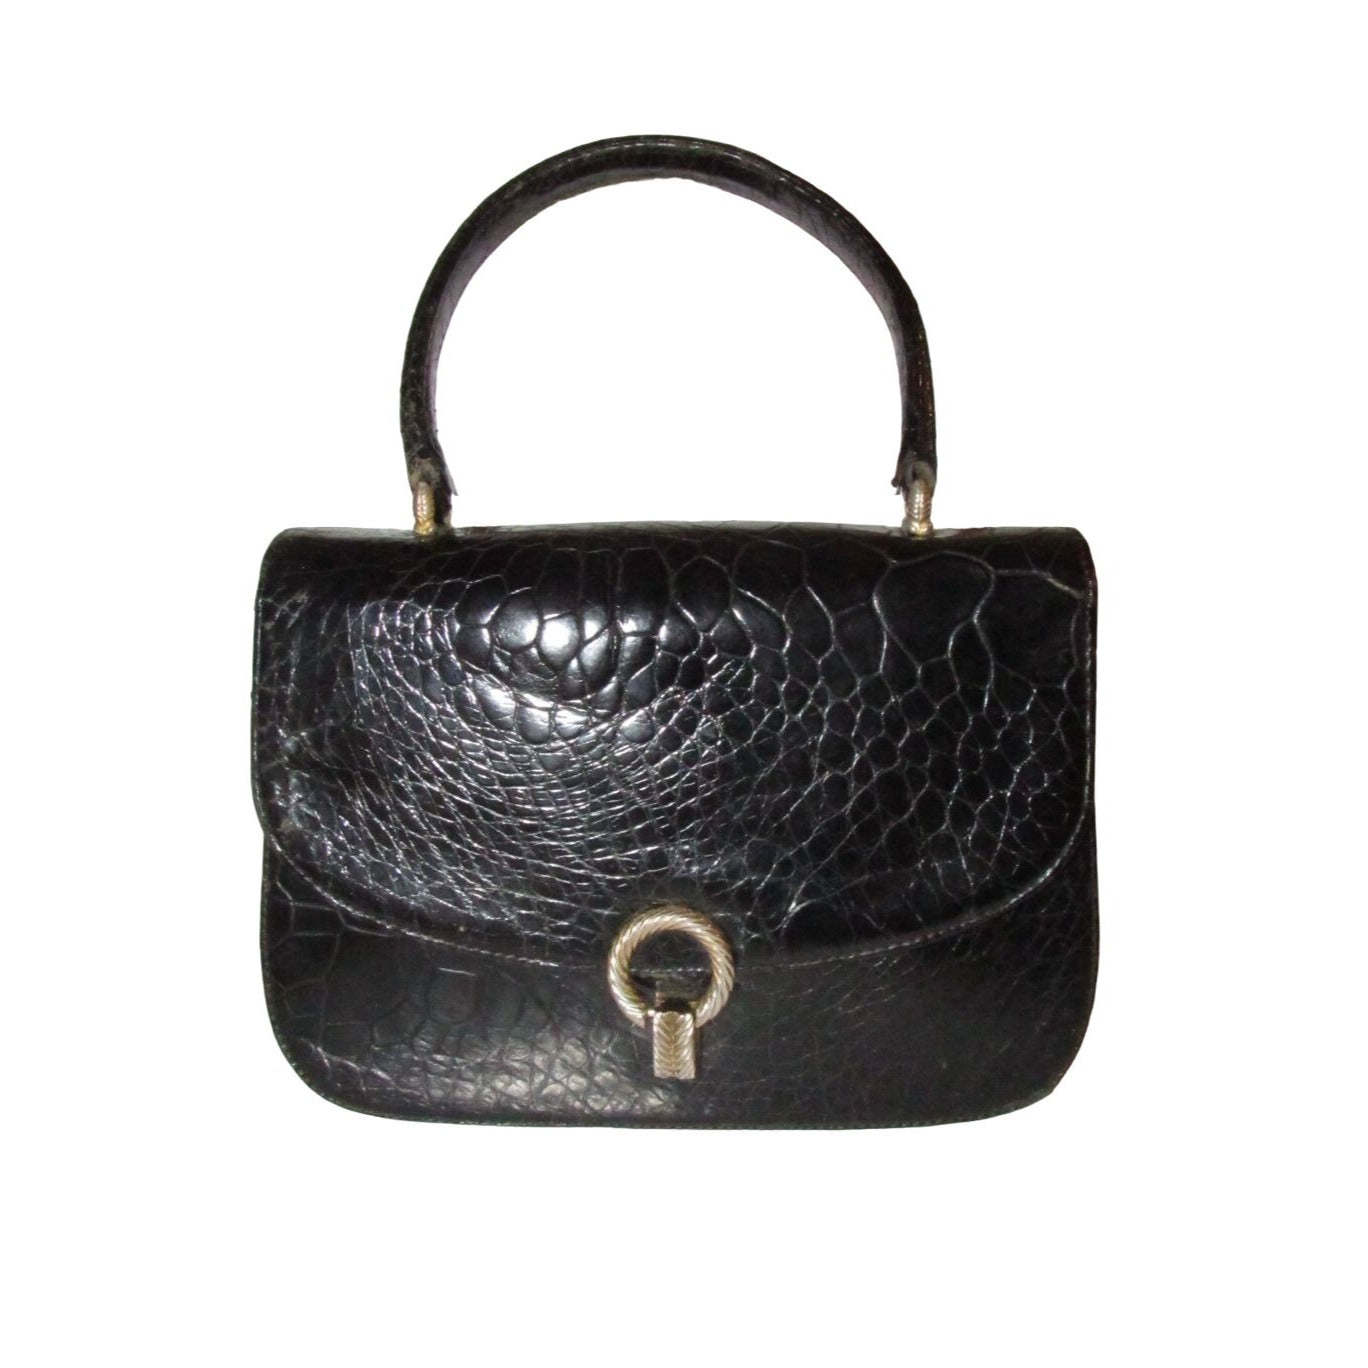 Giorgio GUCCI, Bamboo 1947 style, dark navy crocodile leather, top handle purse with sterling hardware, a boxy, structured shape, & an envelope style top